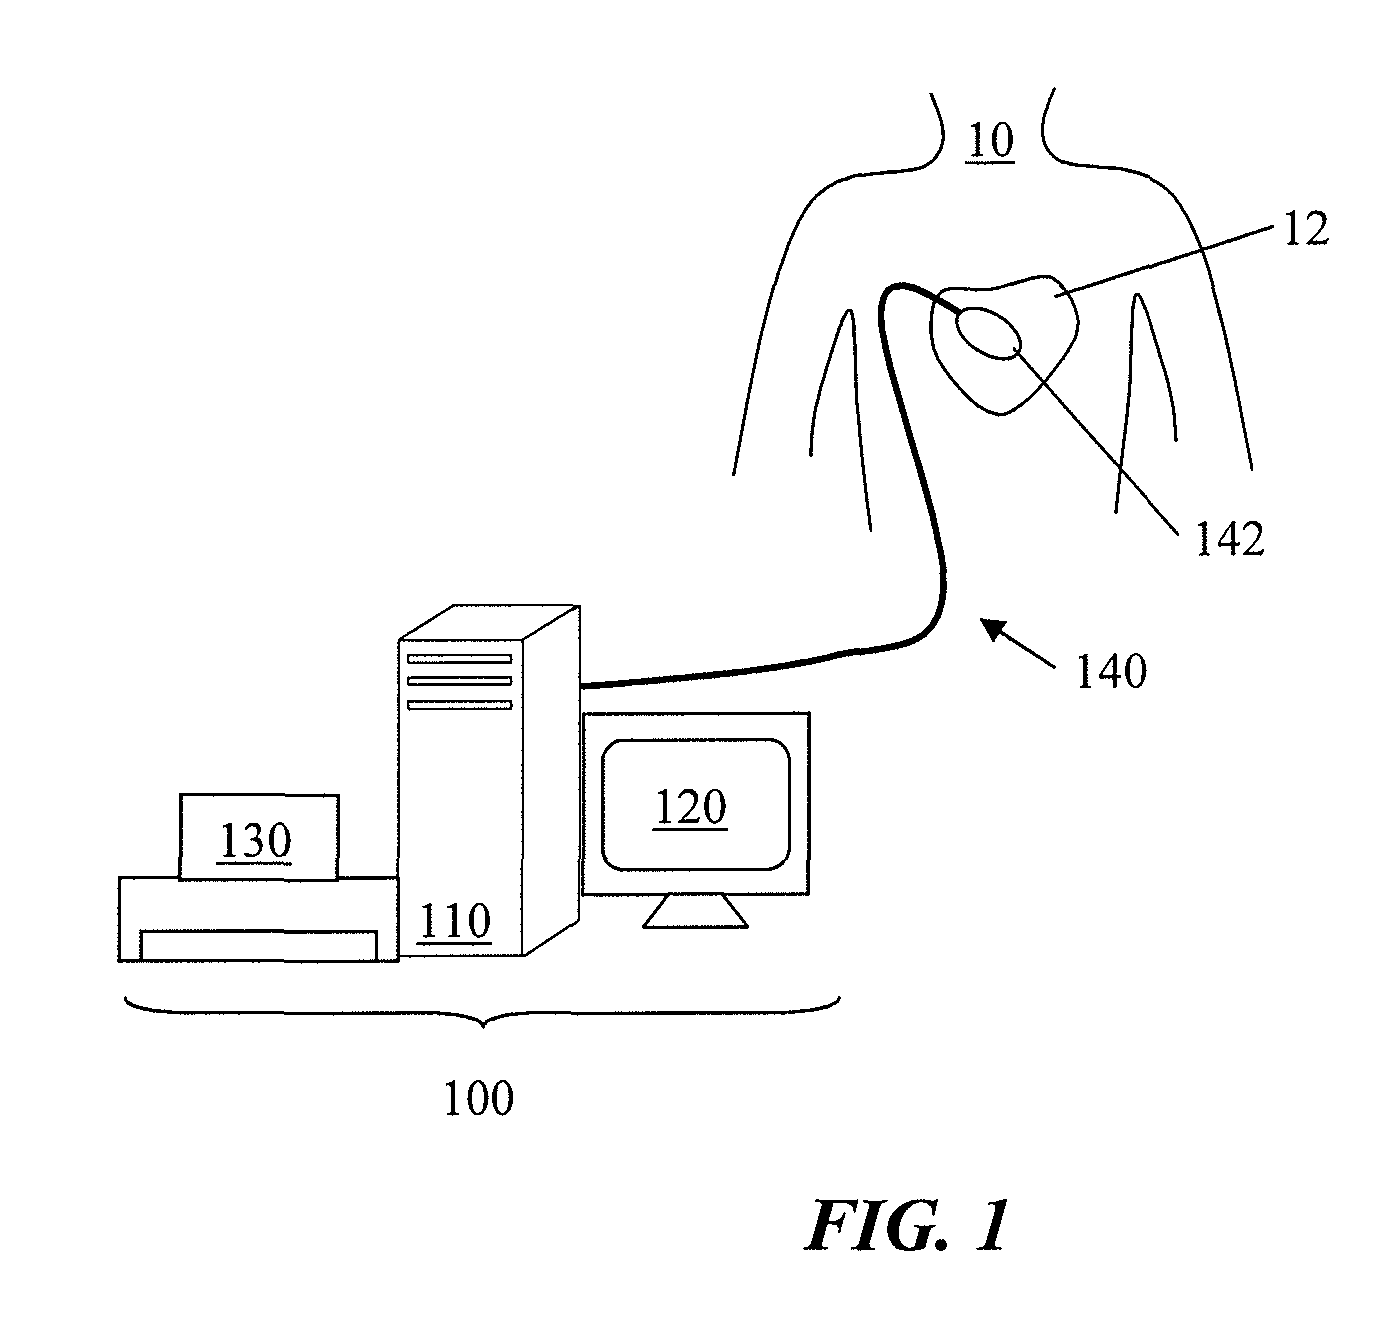 Method and device for determining and presenting surface charge and dipole densities on cardiac walls